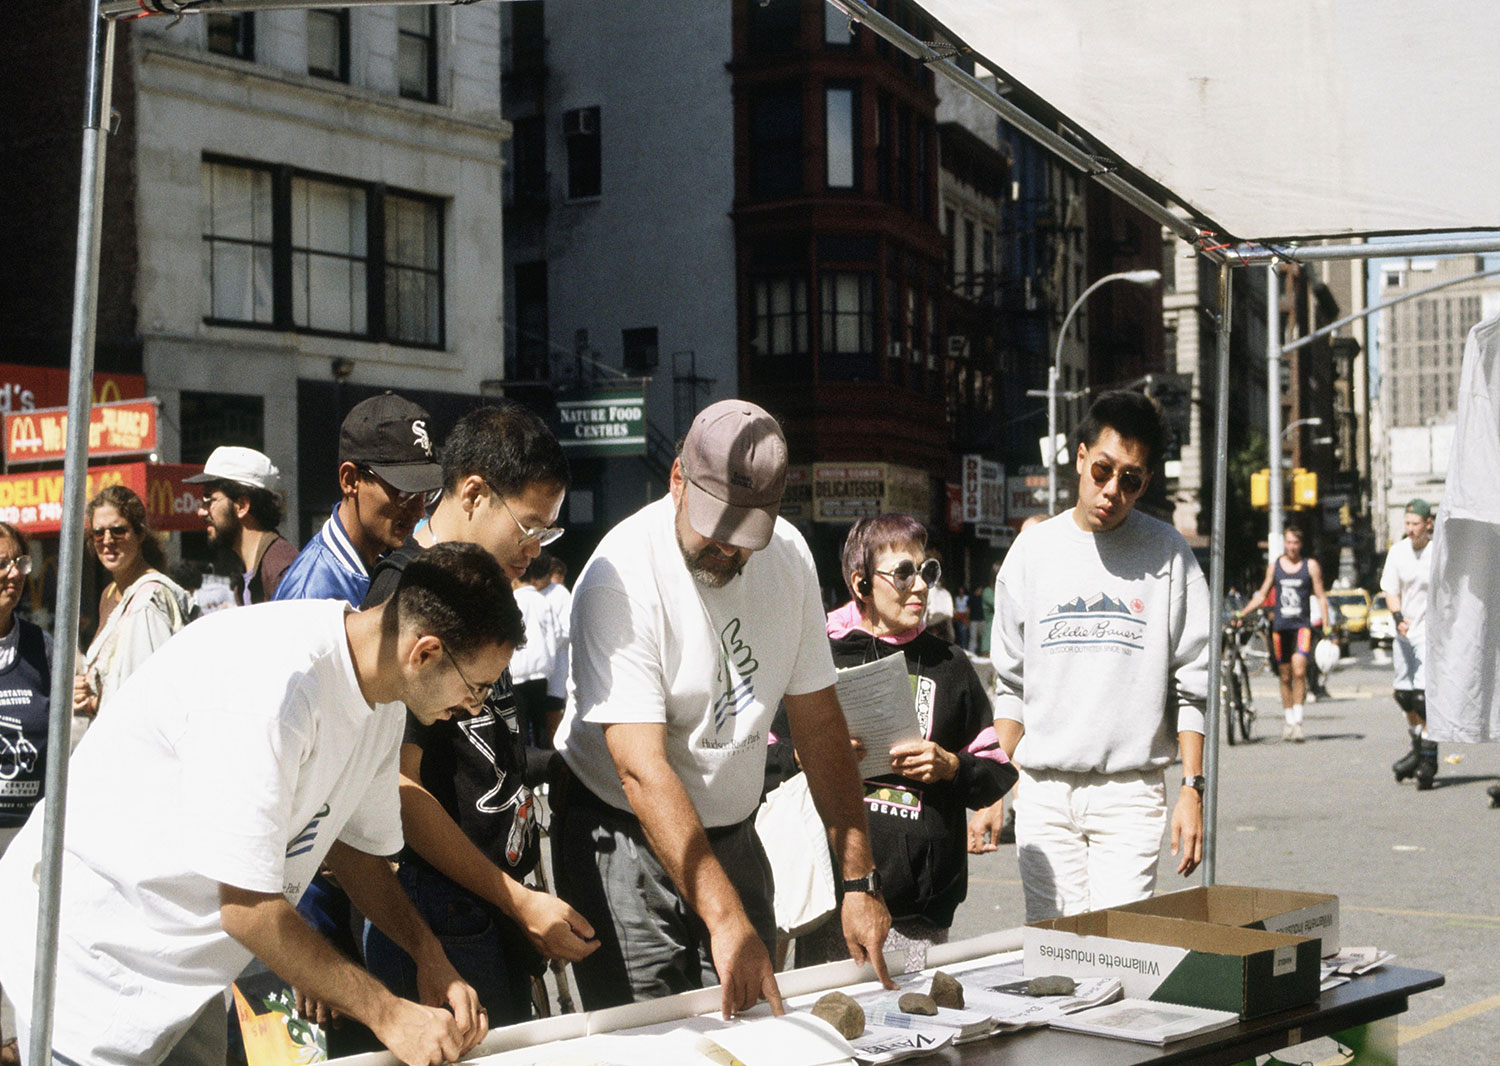 Public Planning For HRP At Union Square Greenmarket 1994